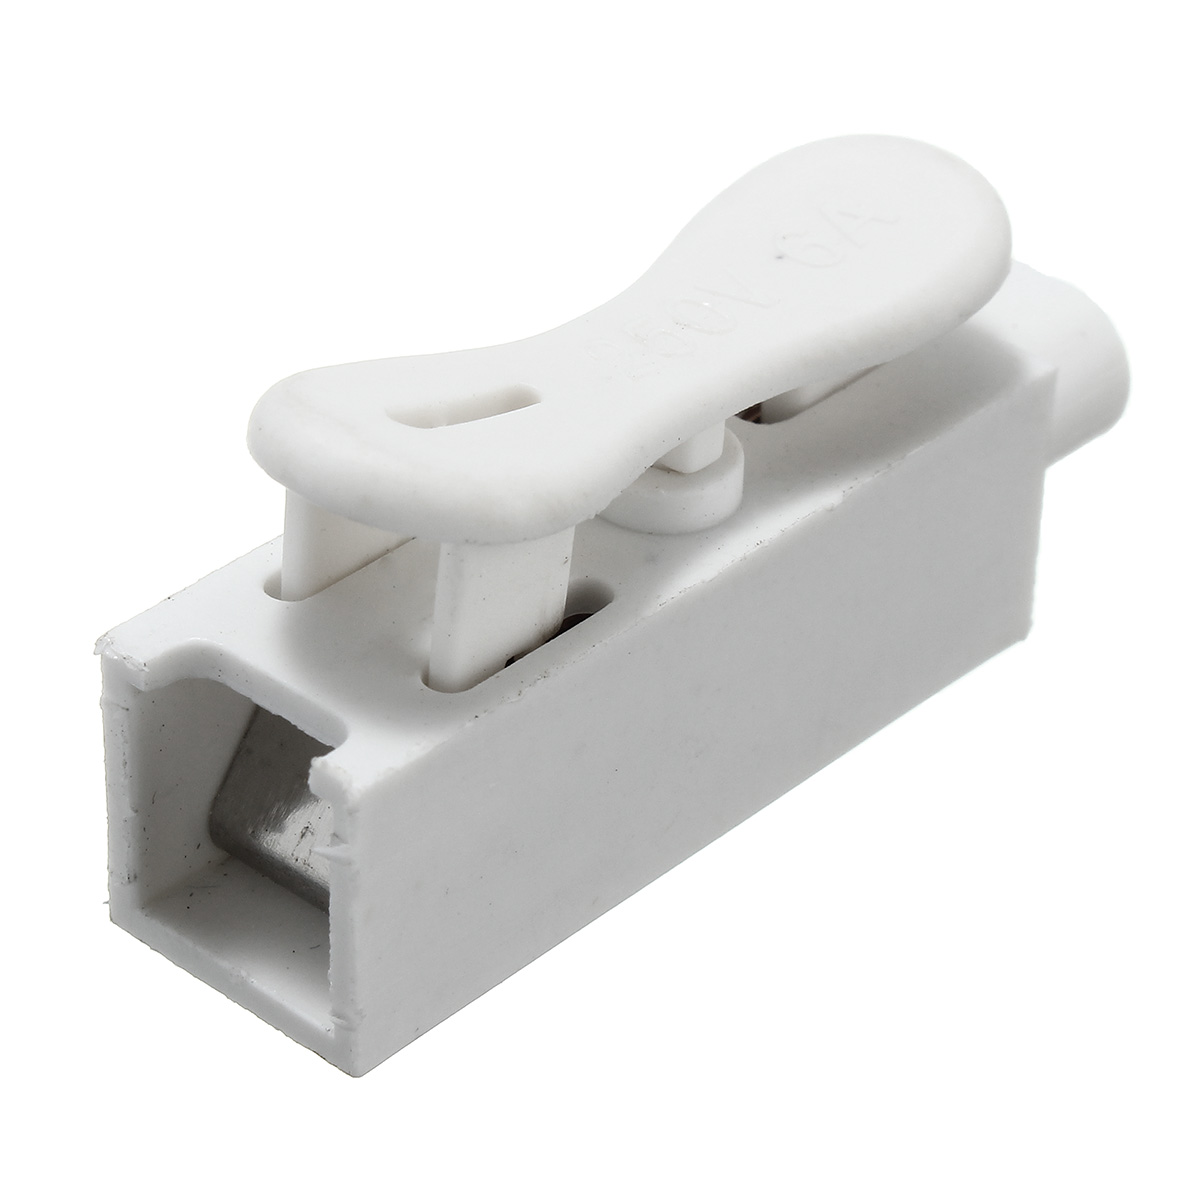 1-Pin-Quick-Fix-Push-in-Clip-Spring-Connector-Cable-Terminal-Block-for-3528-5050-LED-Strip-1162328-1